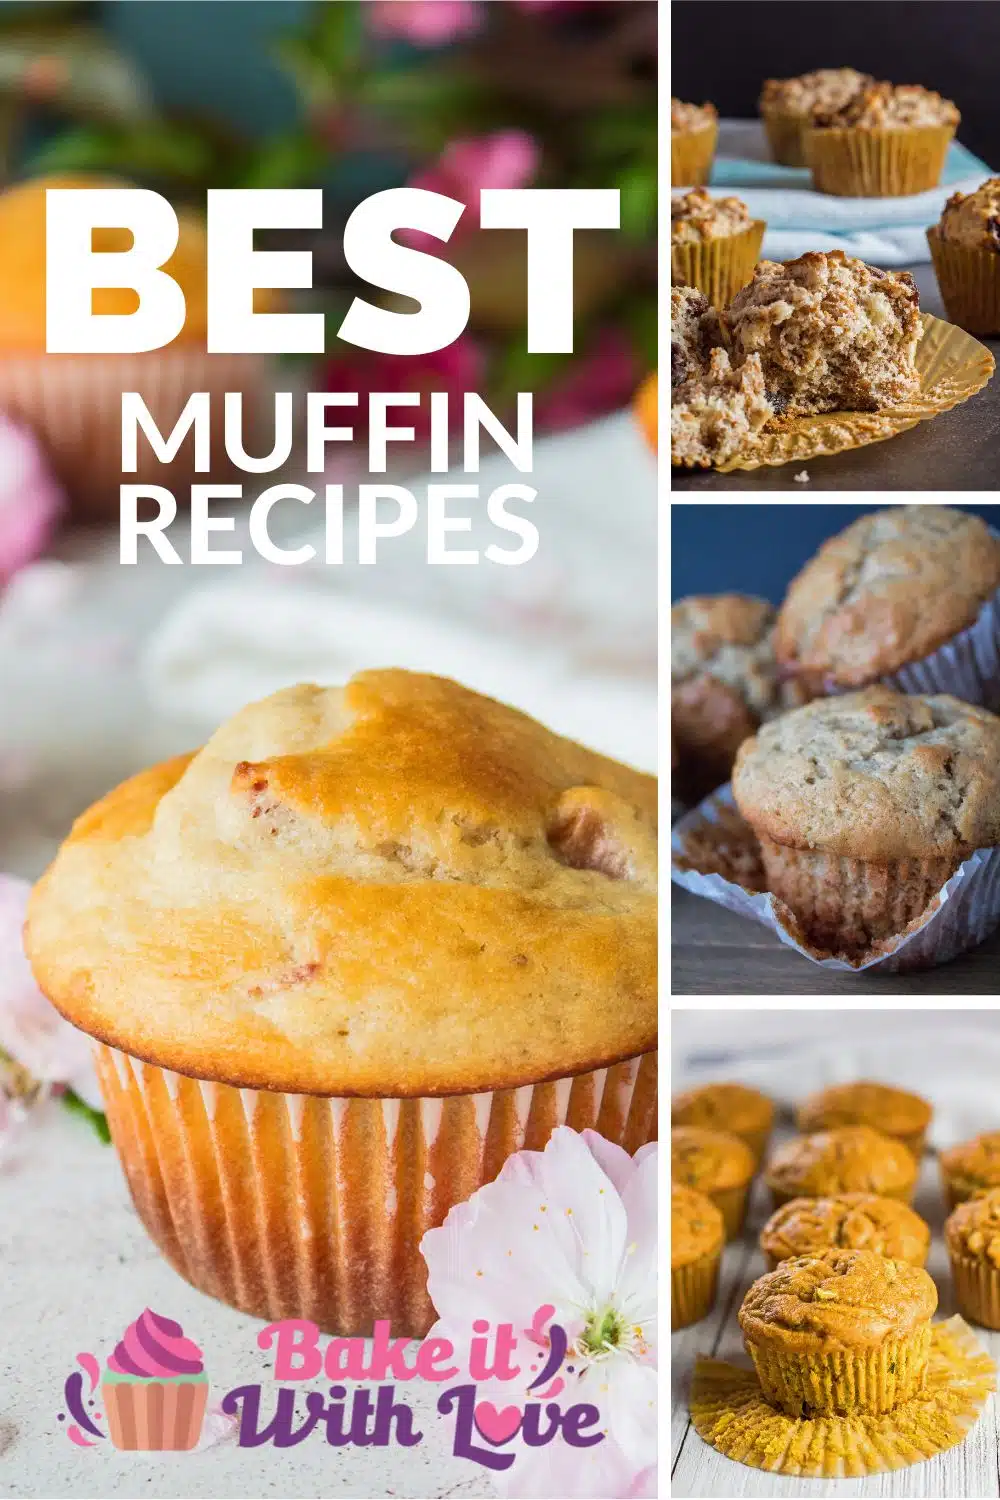 Best muffin recipes pin with collage and text header.